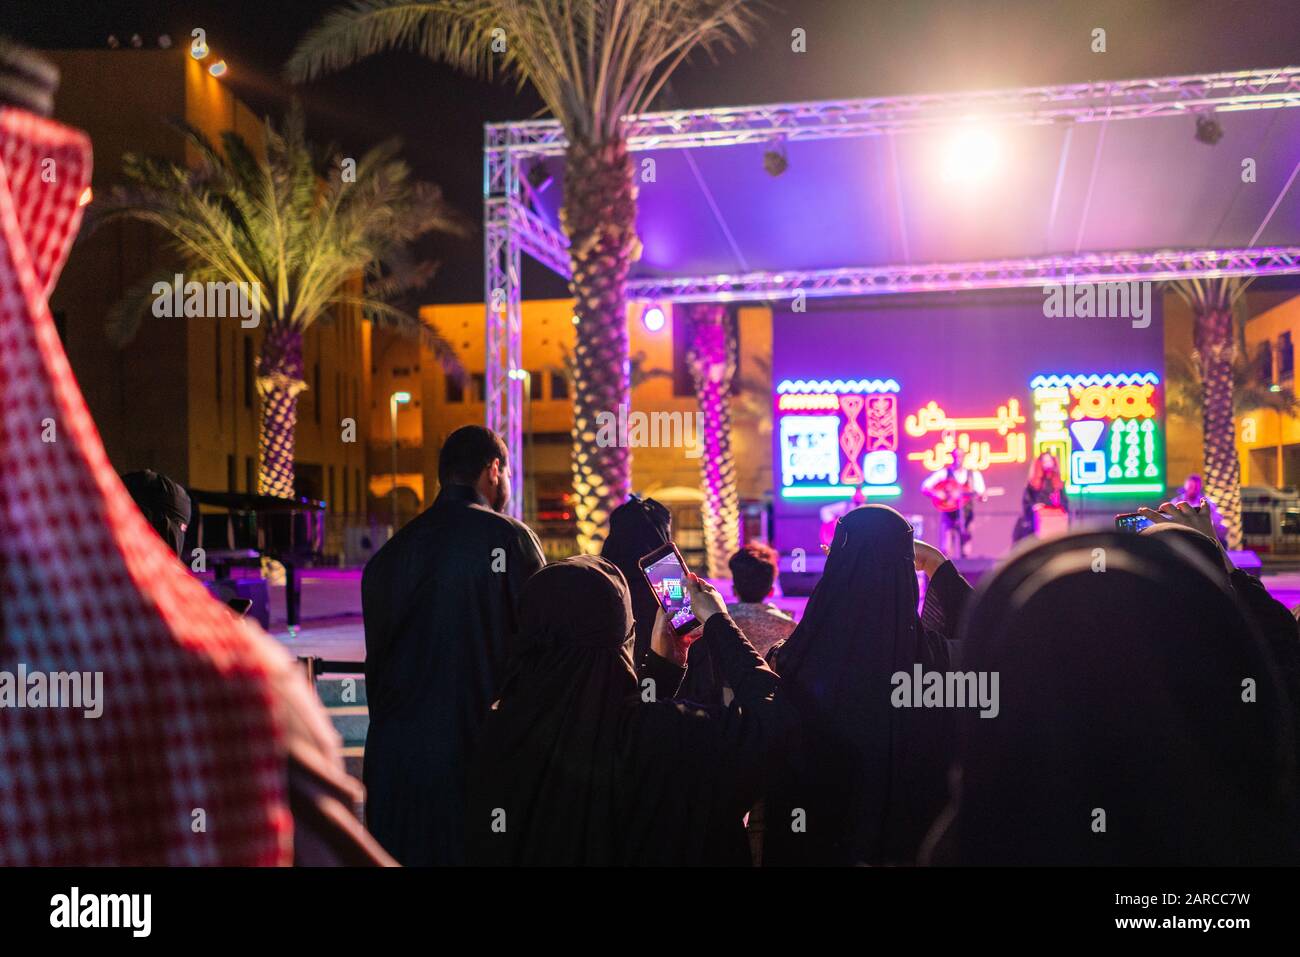 Families in Riyadh, Saudi Arabia enjoying a legal public concert and recording video on mobile phones at night Stock Photo